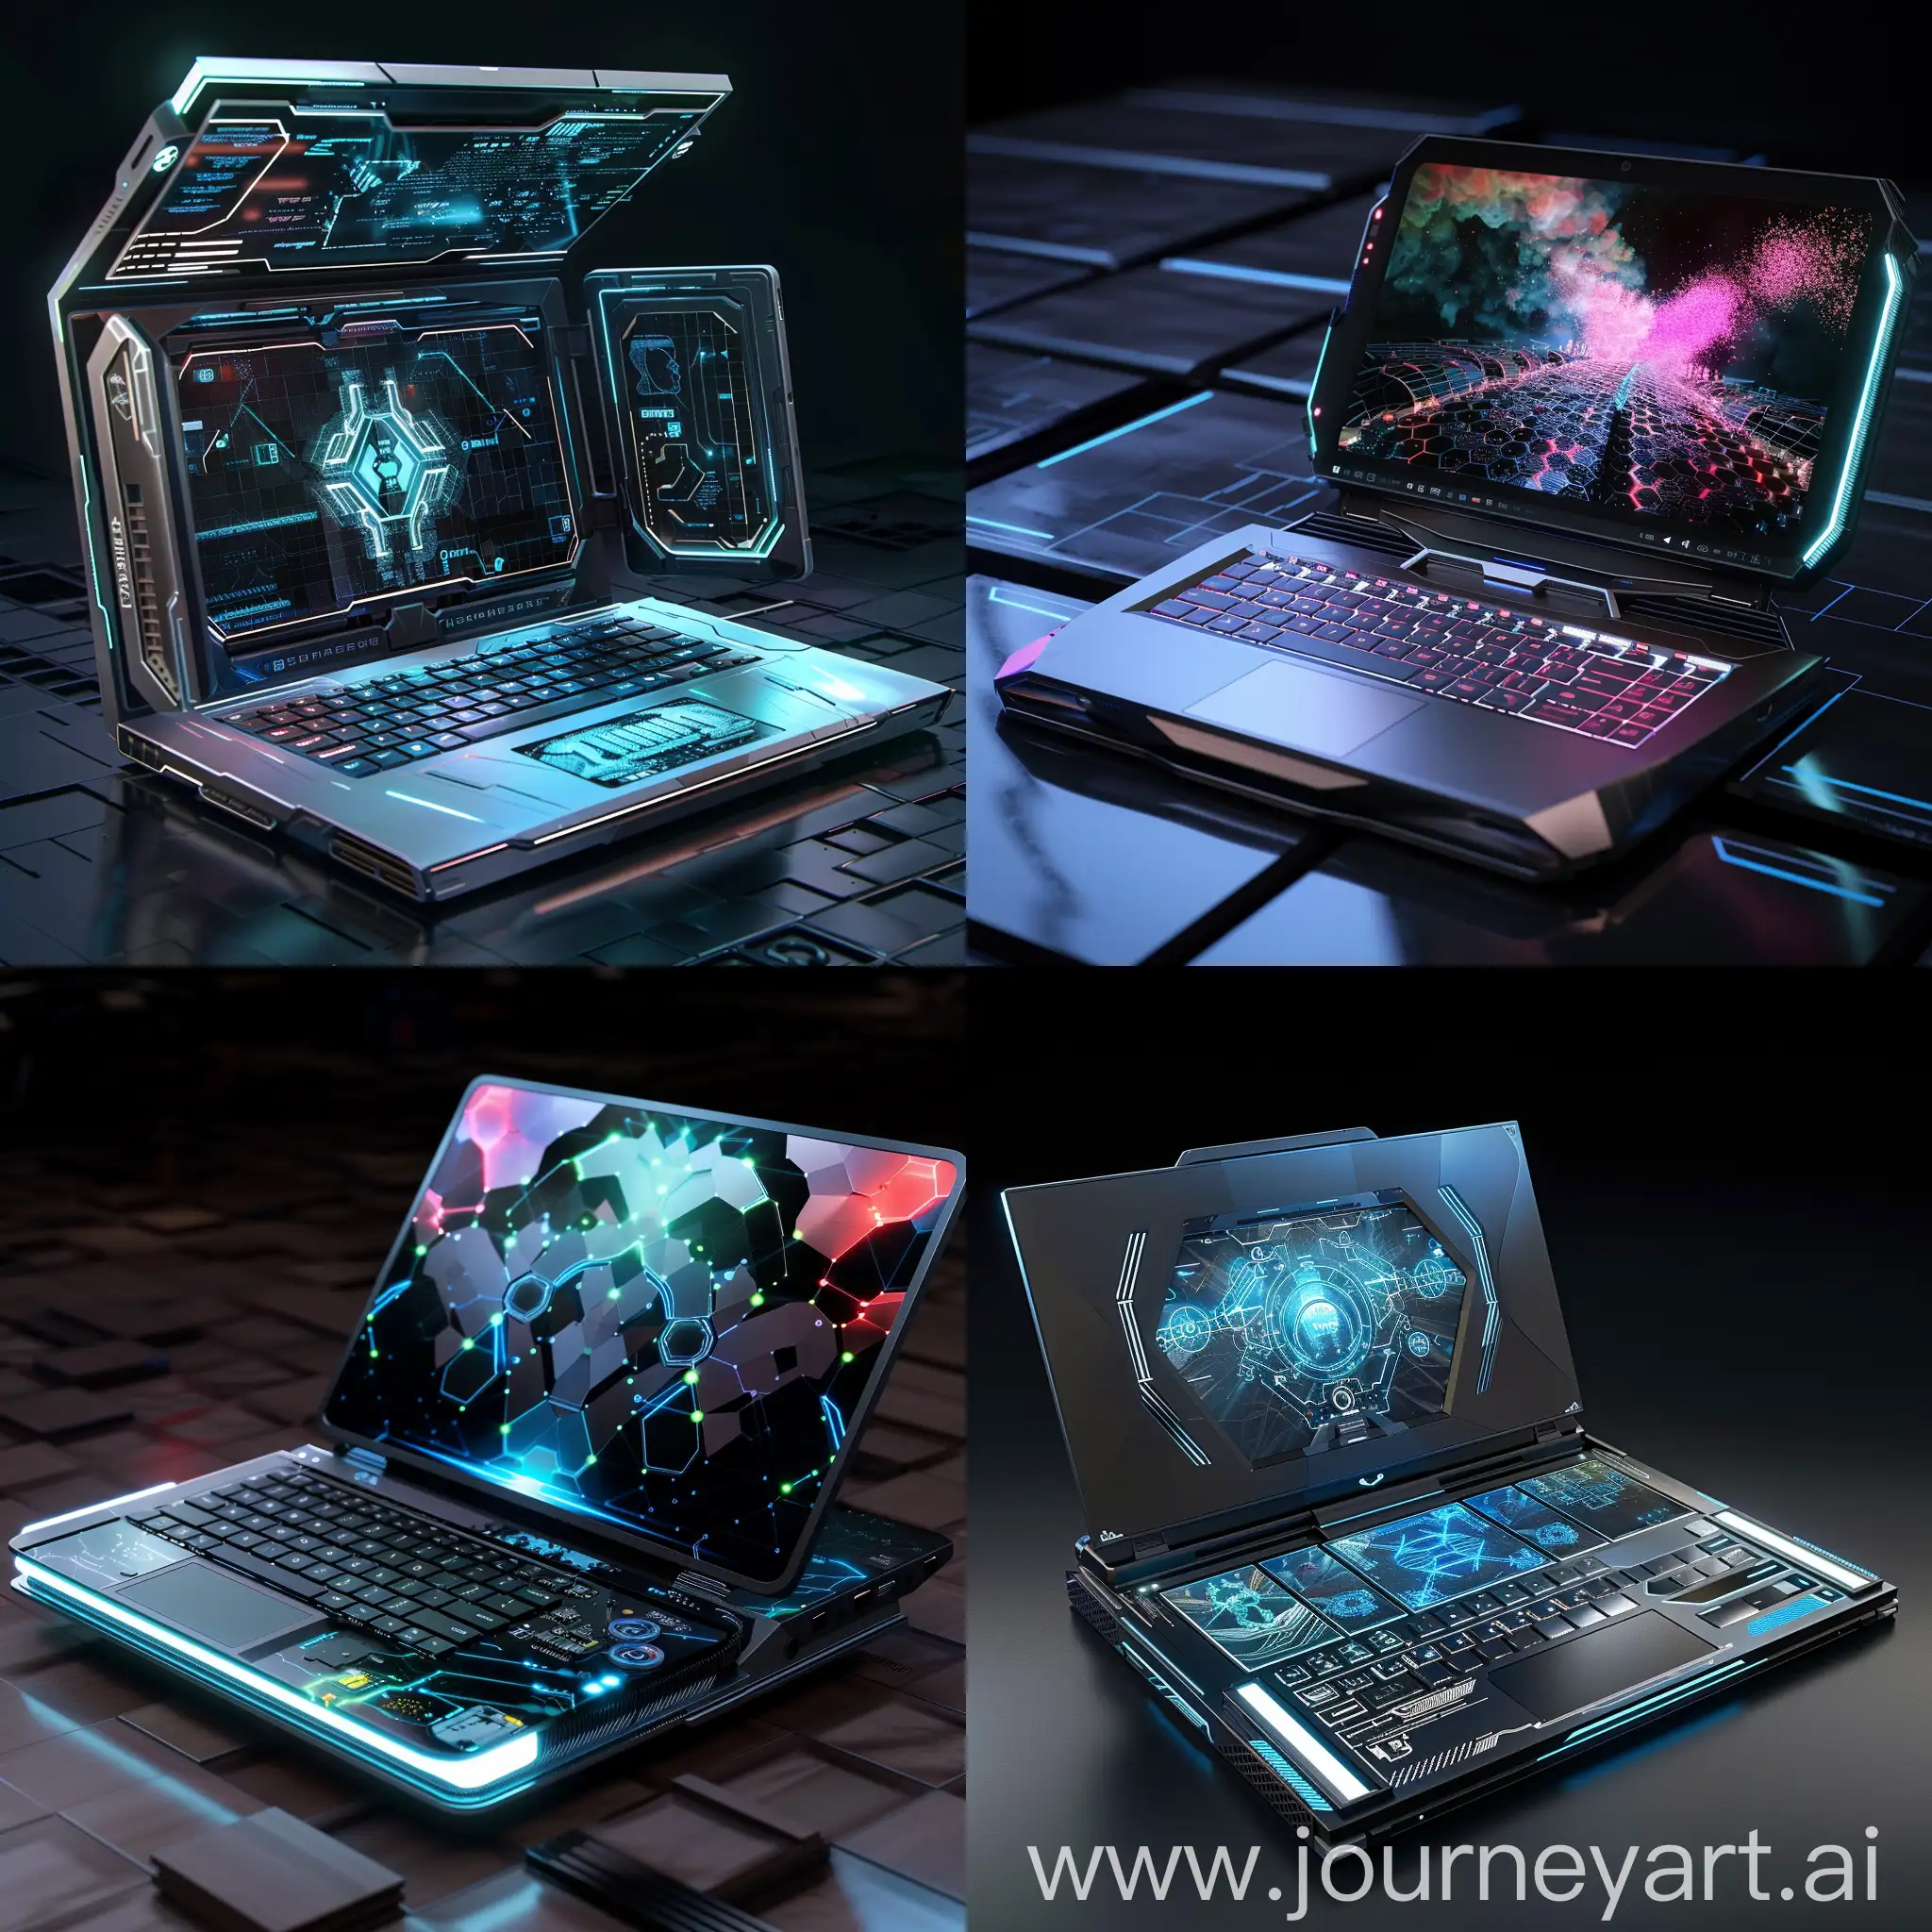 Futuristic-Quantum-Laptop-with-Foldable-Displays-and-Advanced-Nanotechnology